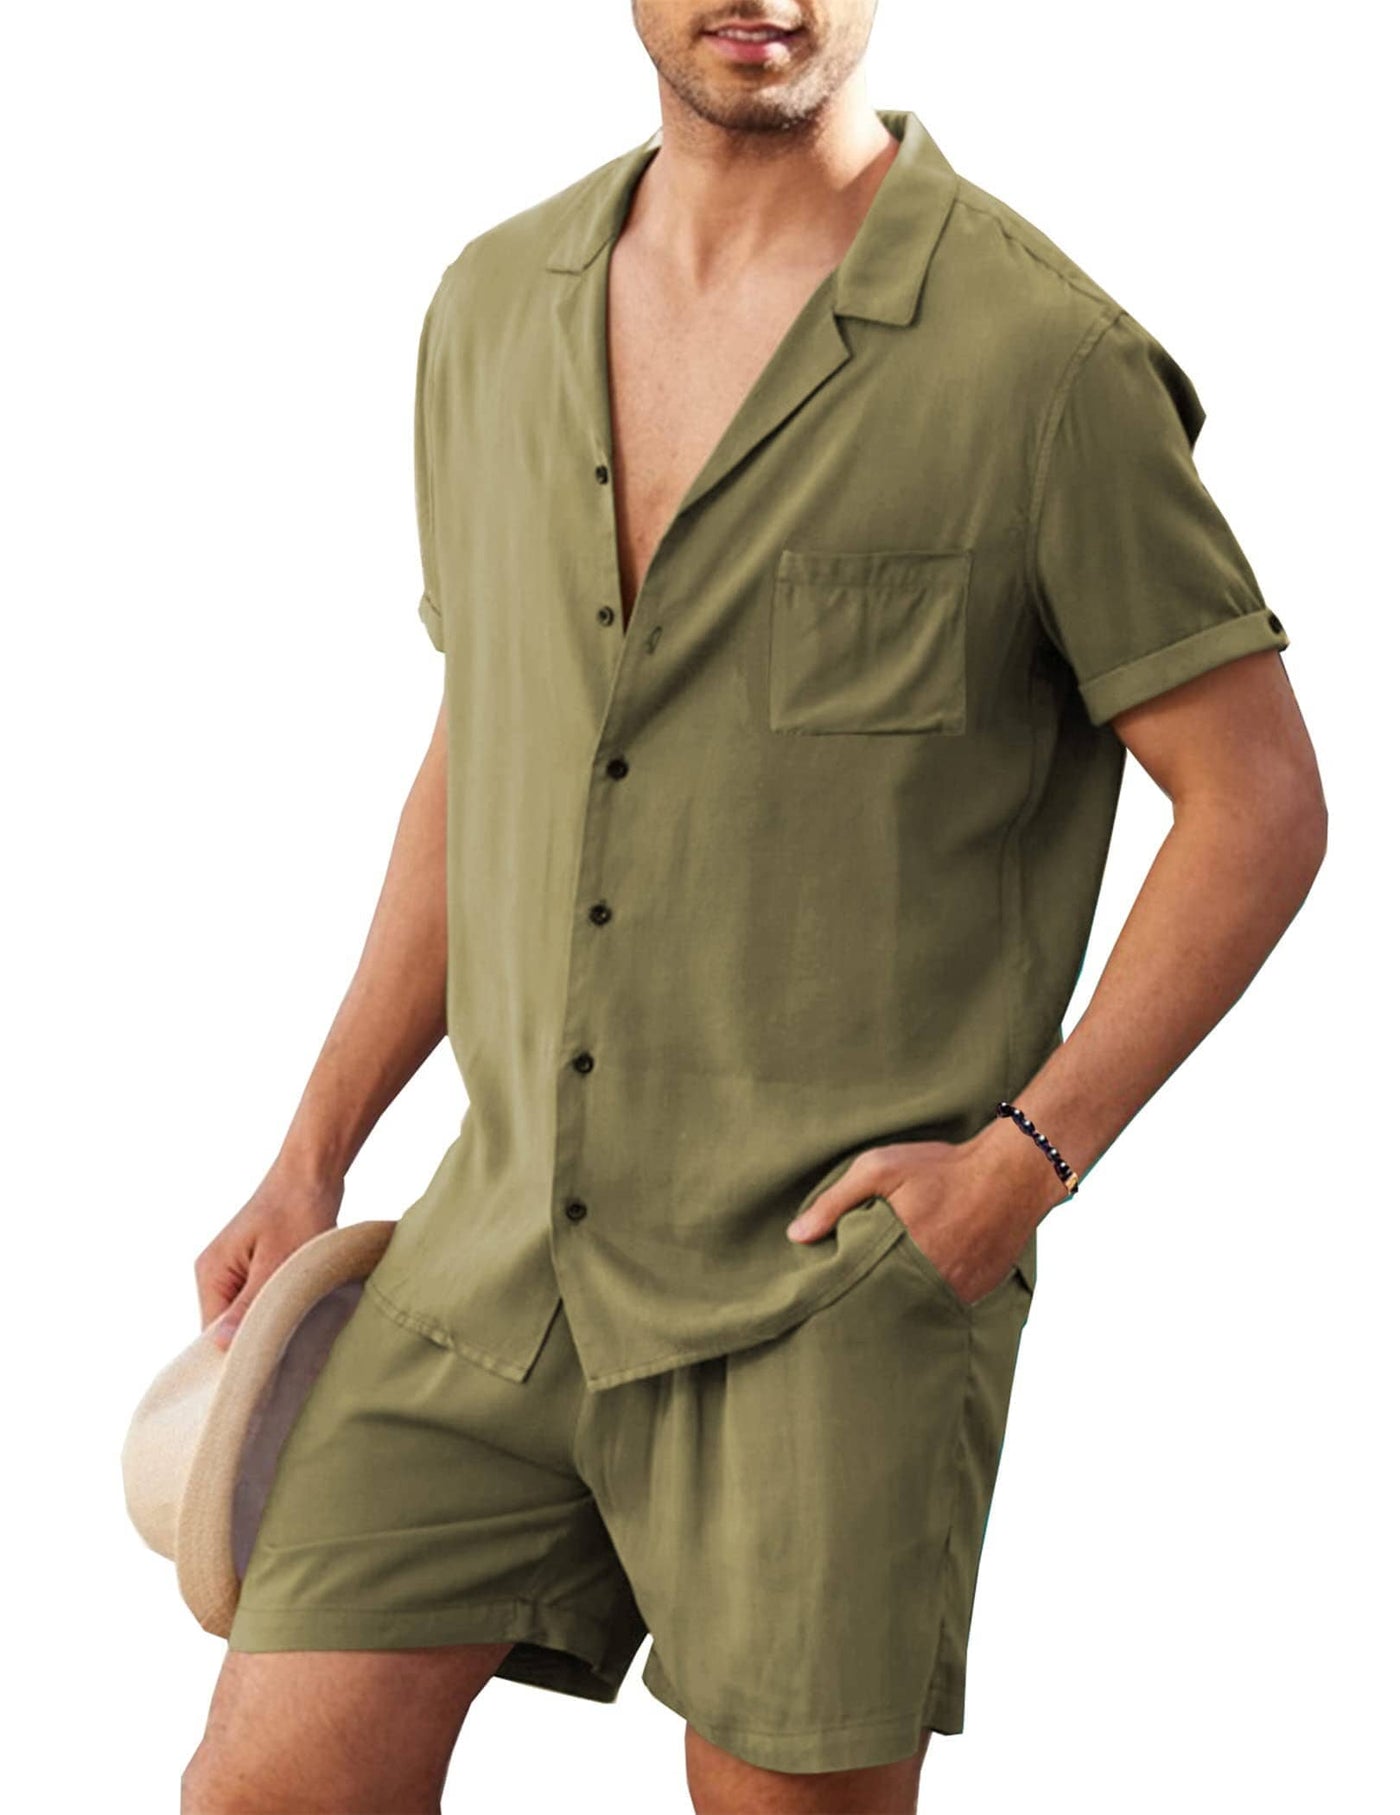 Beach Shirt Set (US Only) - Lightweight & Casual, Perfect for Outings ...